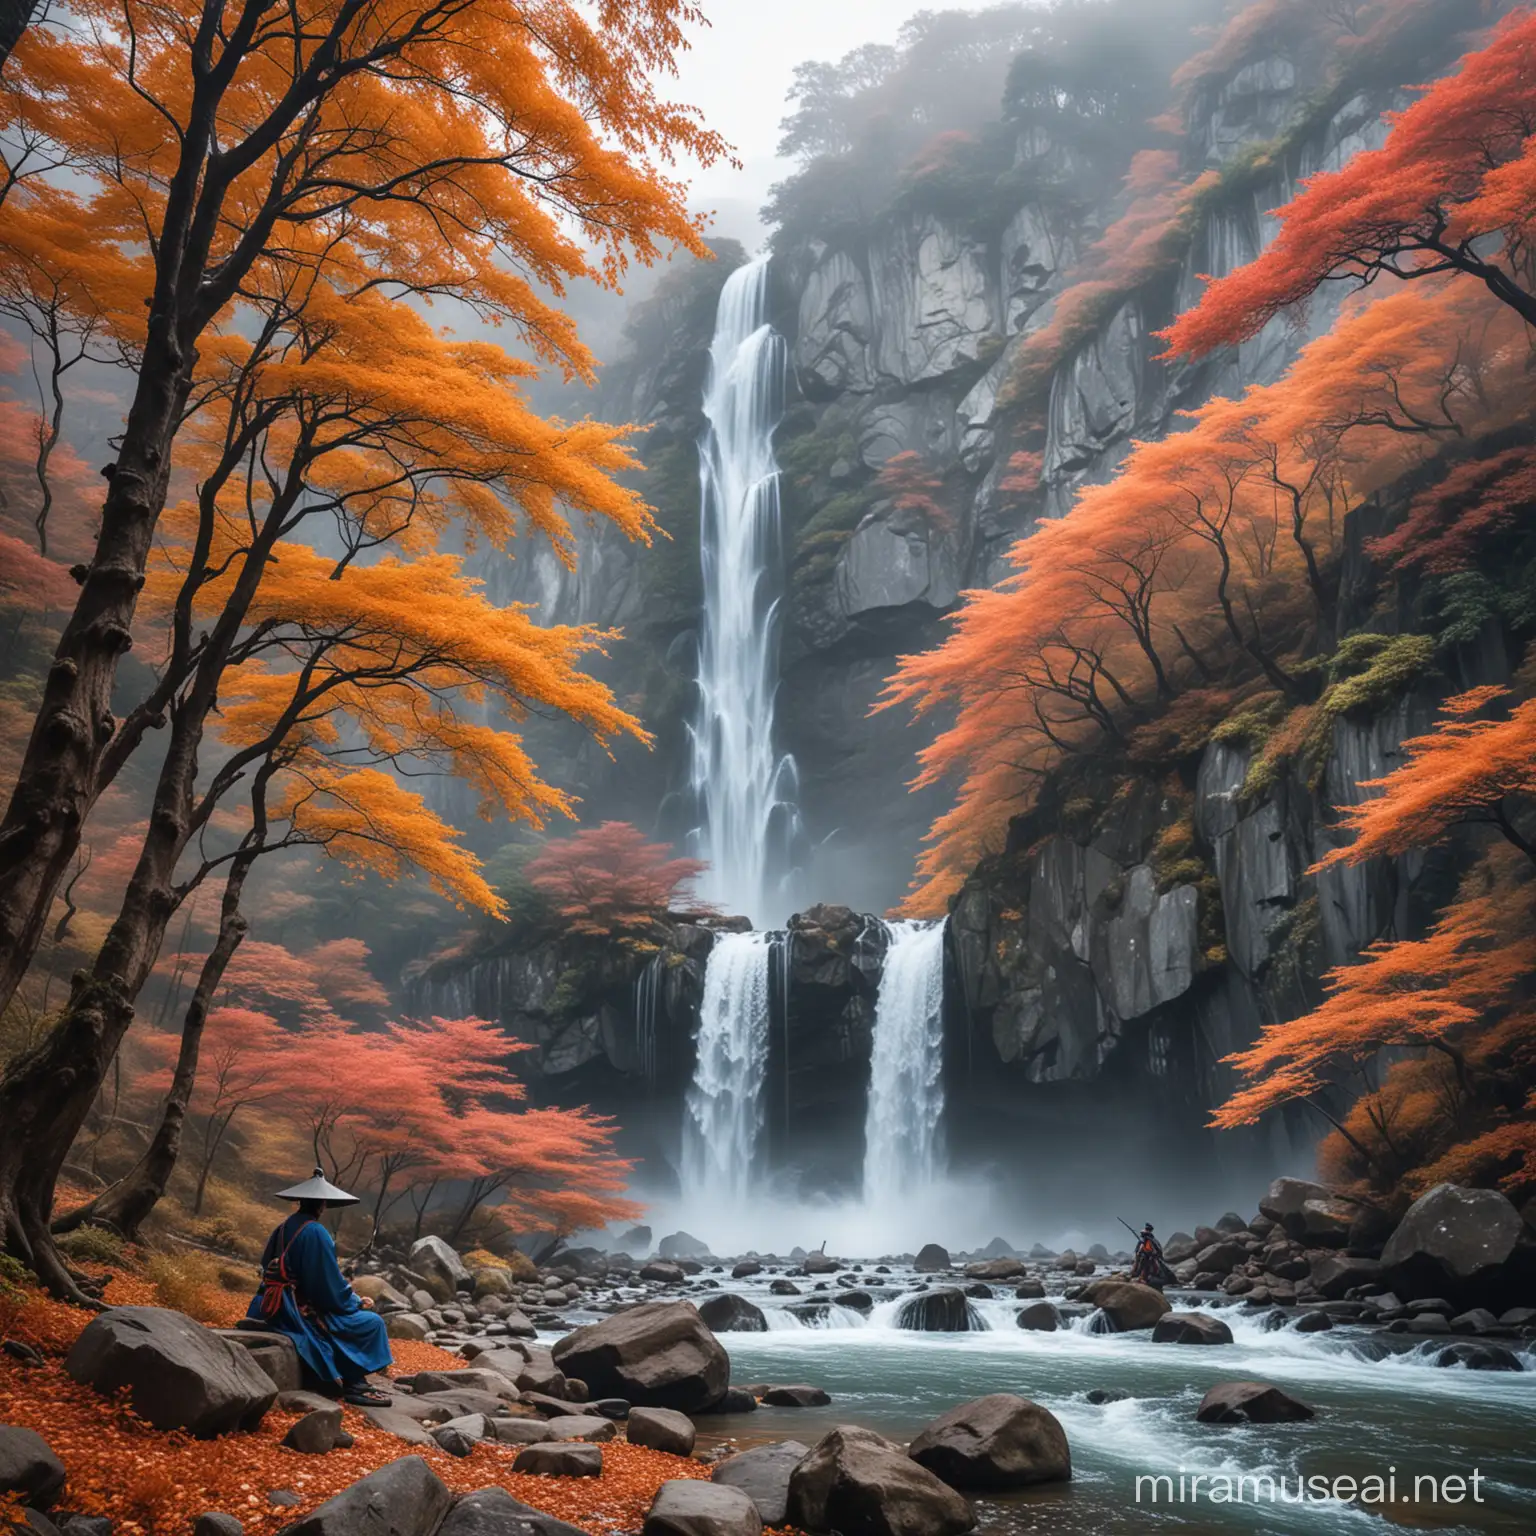 Serene Samurai by Cascading Waterfall in Autumn Forest